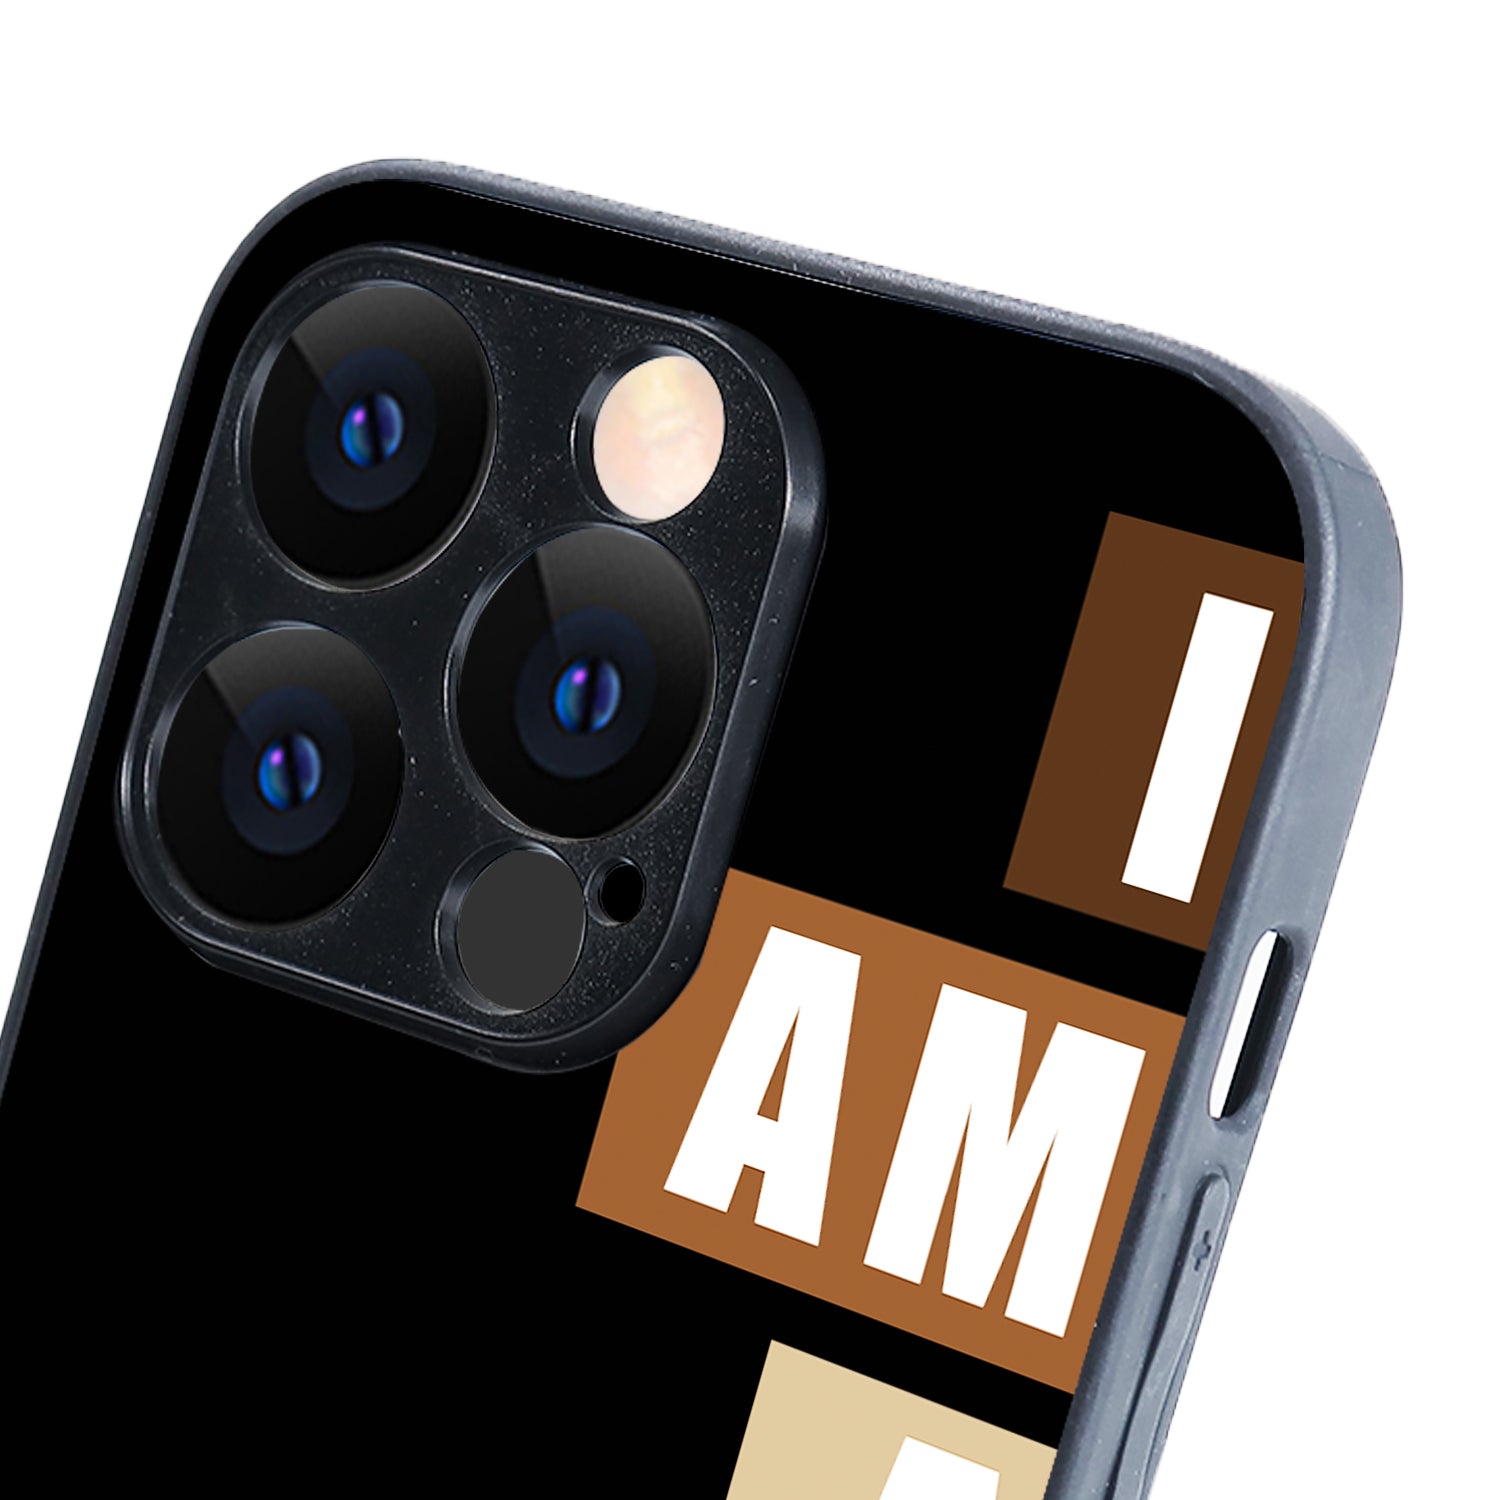 I Am A Man Of Words Motivational Quotes iPhone 14 Pro Case